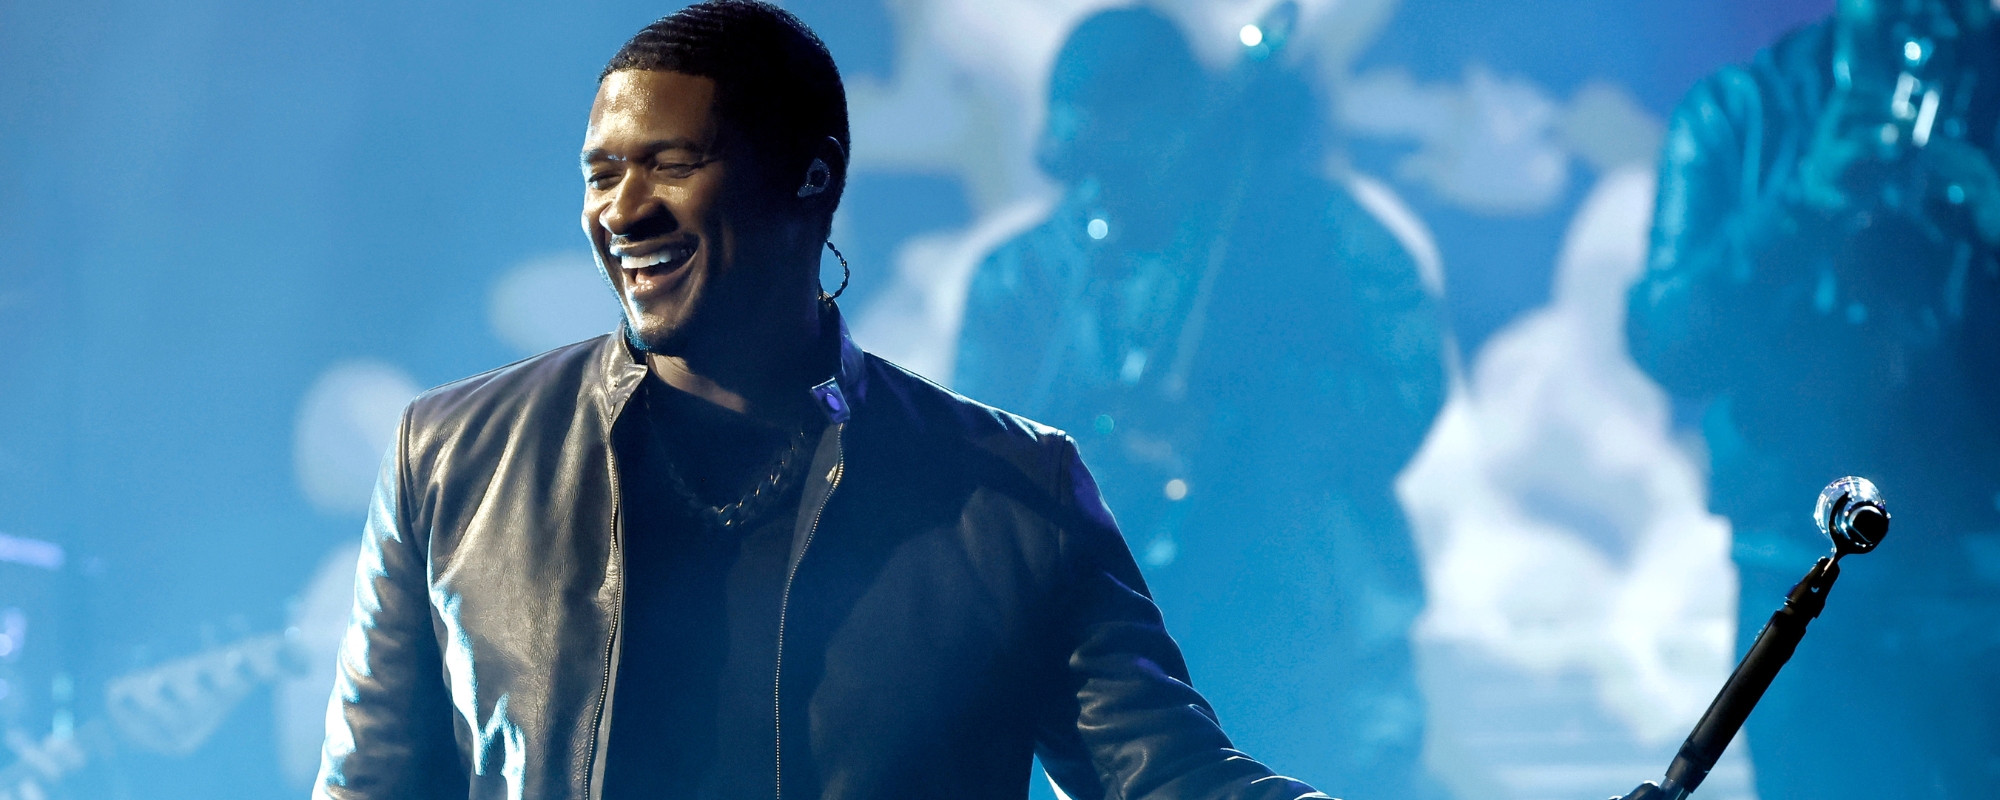 Fans React to Usher’s Emotional Moment During the Final Show of His Sold-Out ‘My Way’ Las Vegas Residency